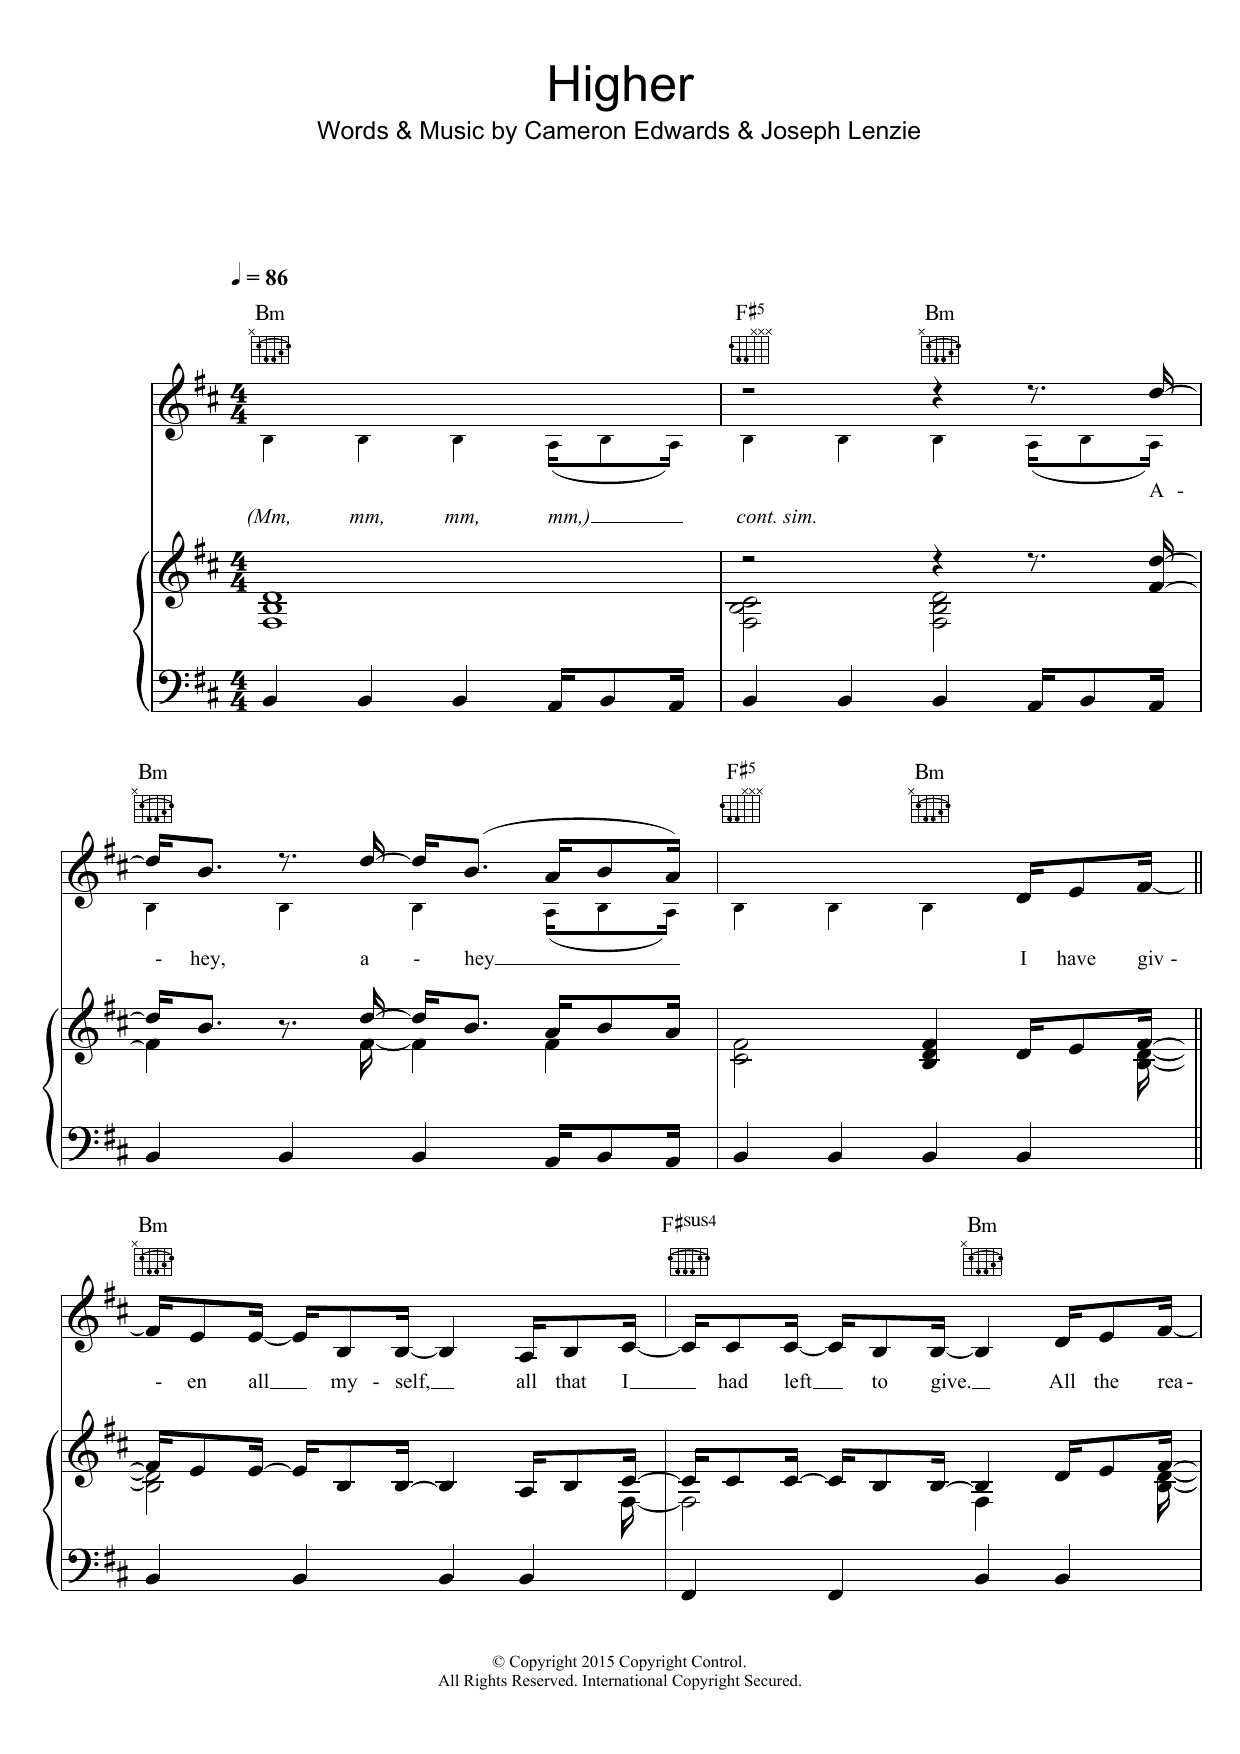 Download Sigma Higher (feat. Labrinth) Sheet Music